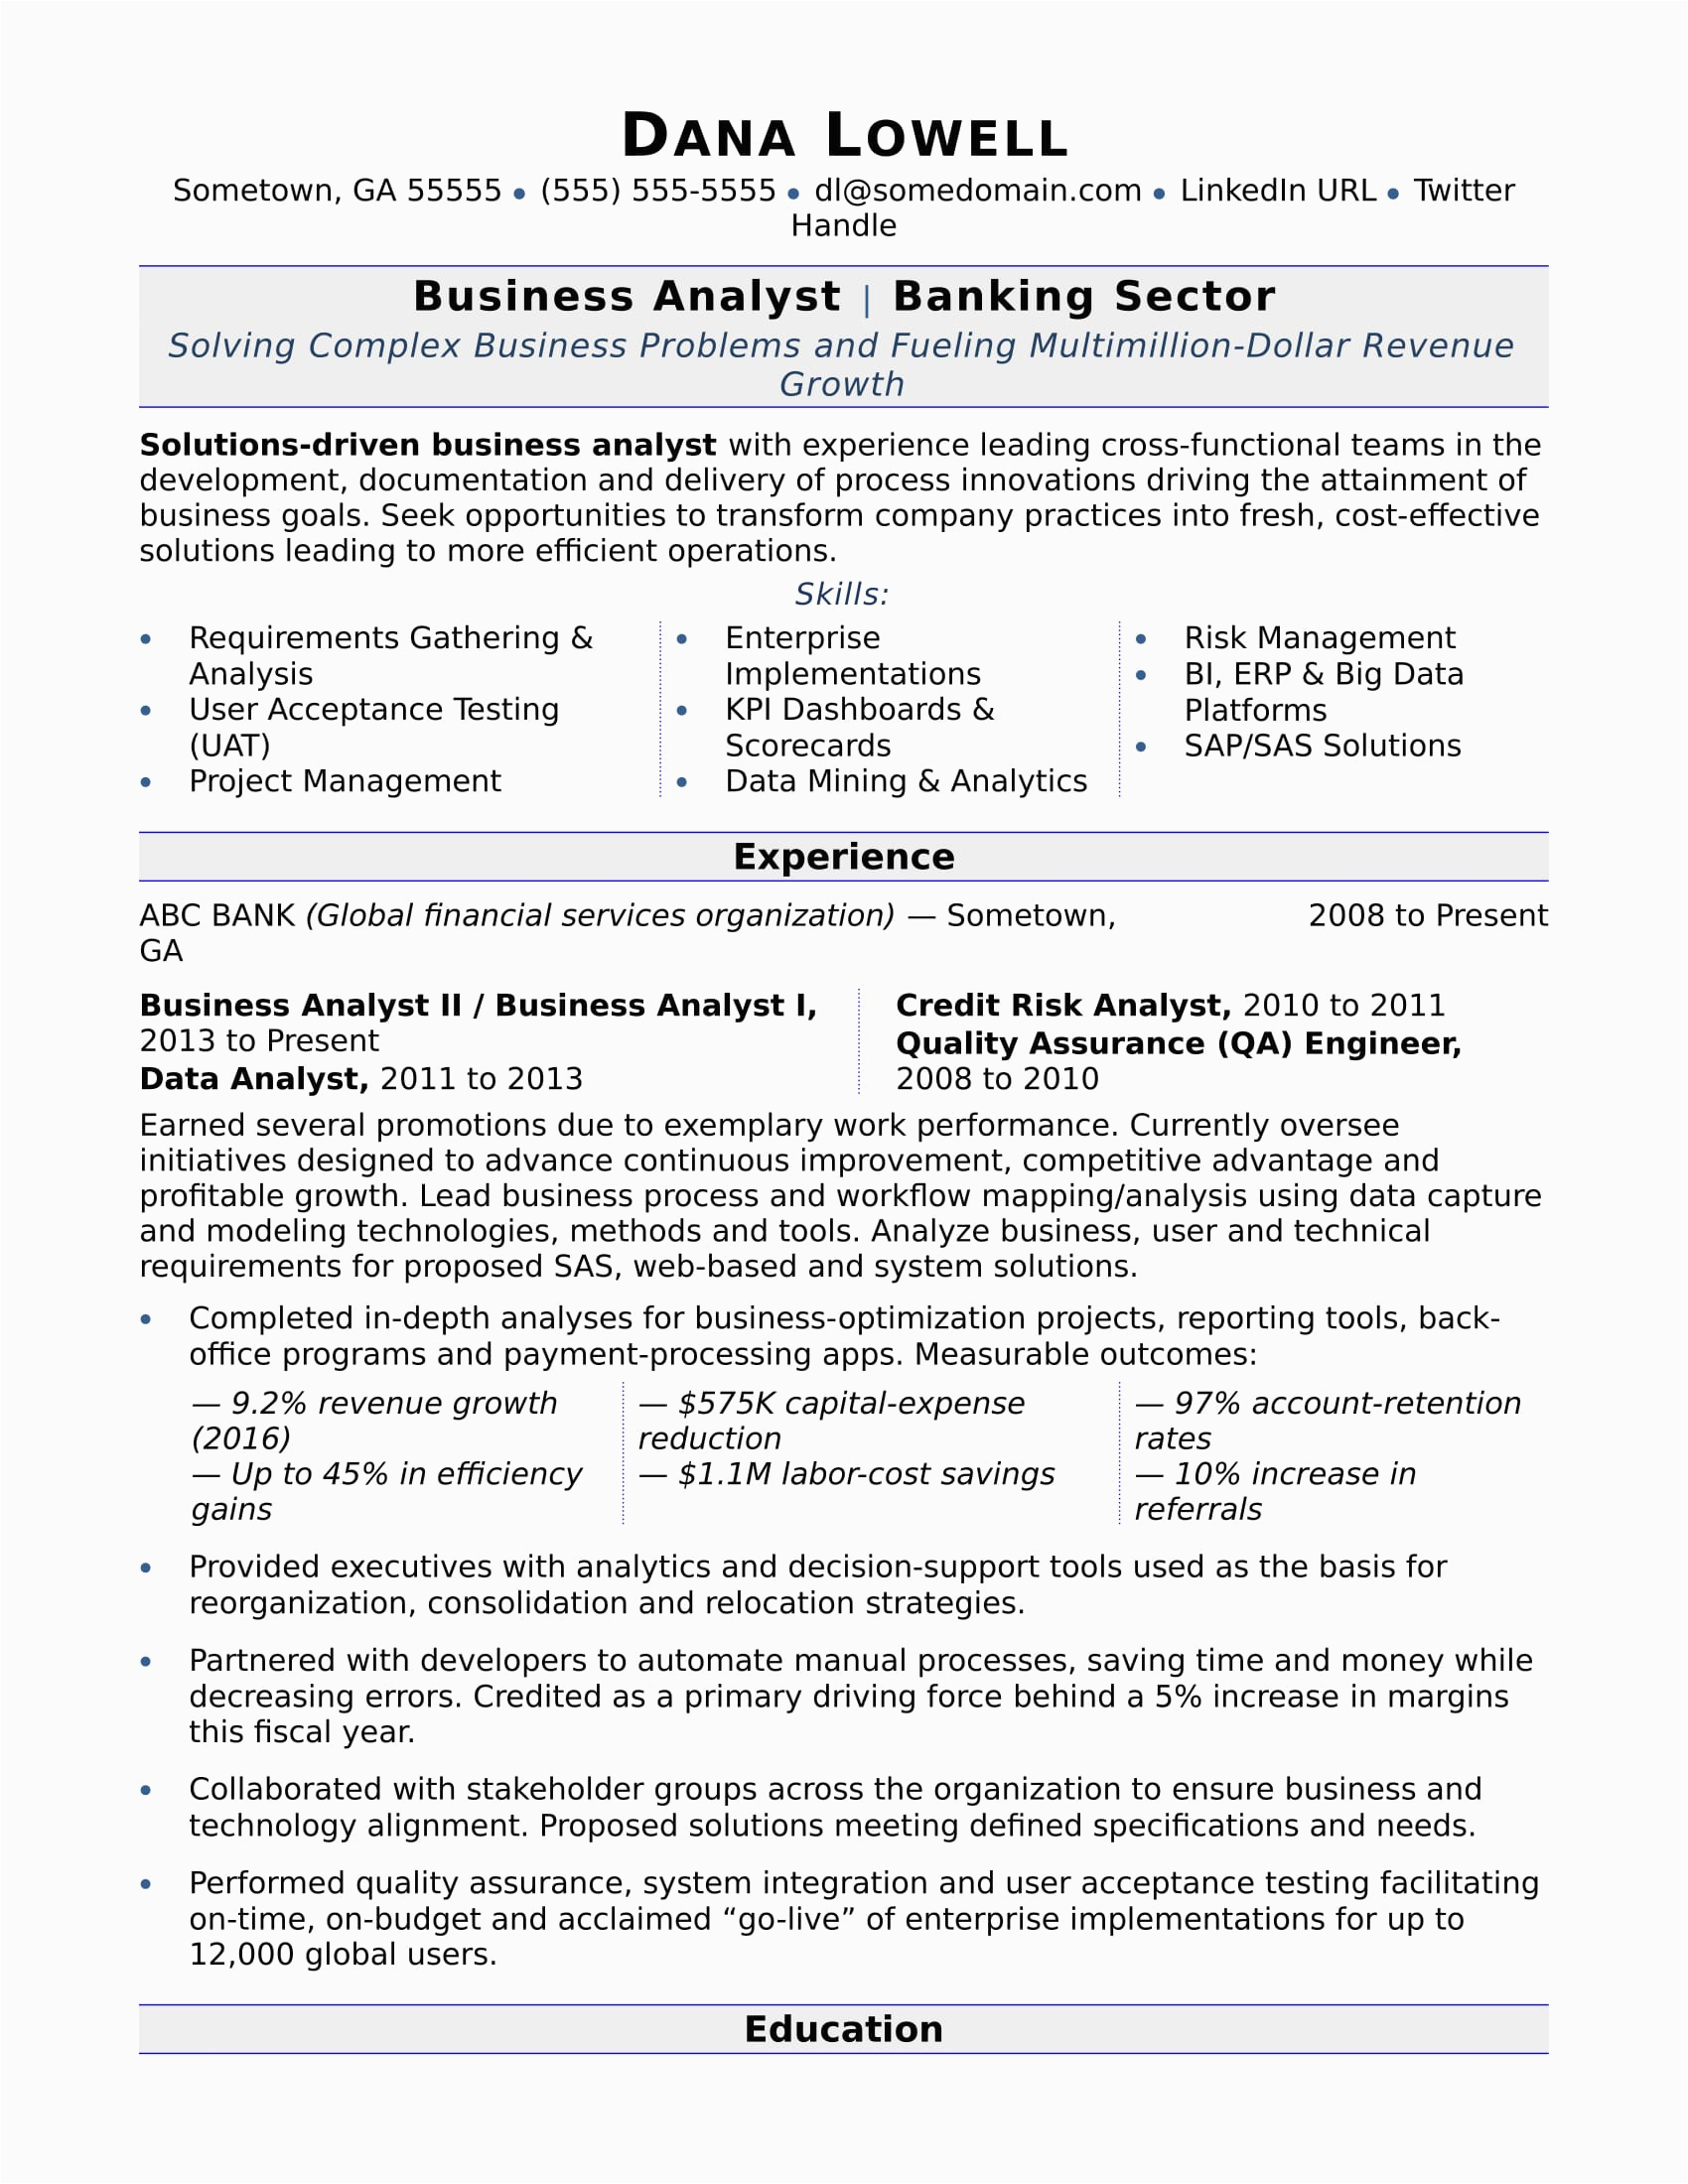 Sample Resume Summary for Business Analyst Business Analyst Resume Sample